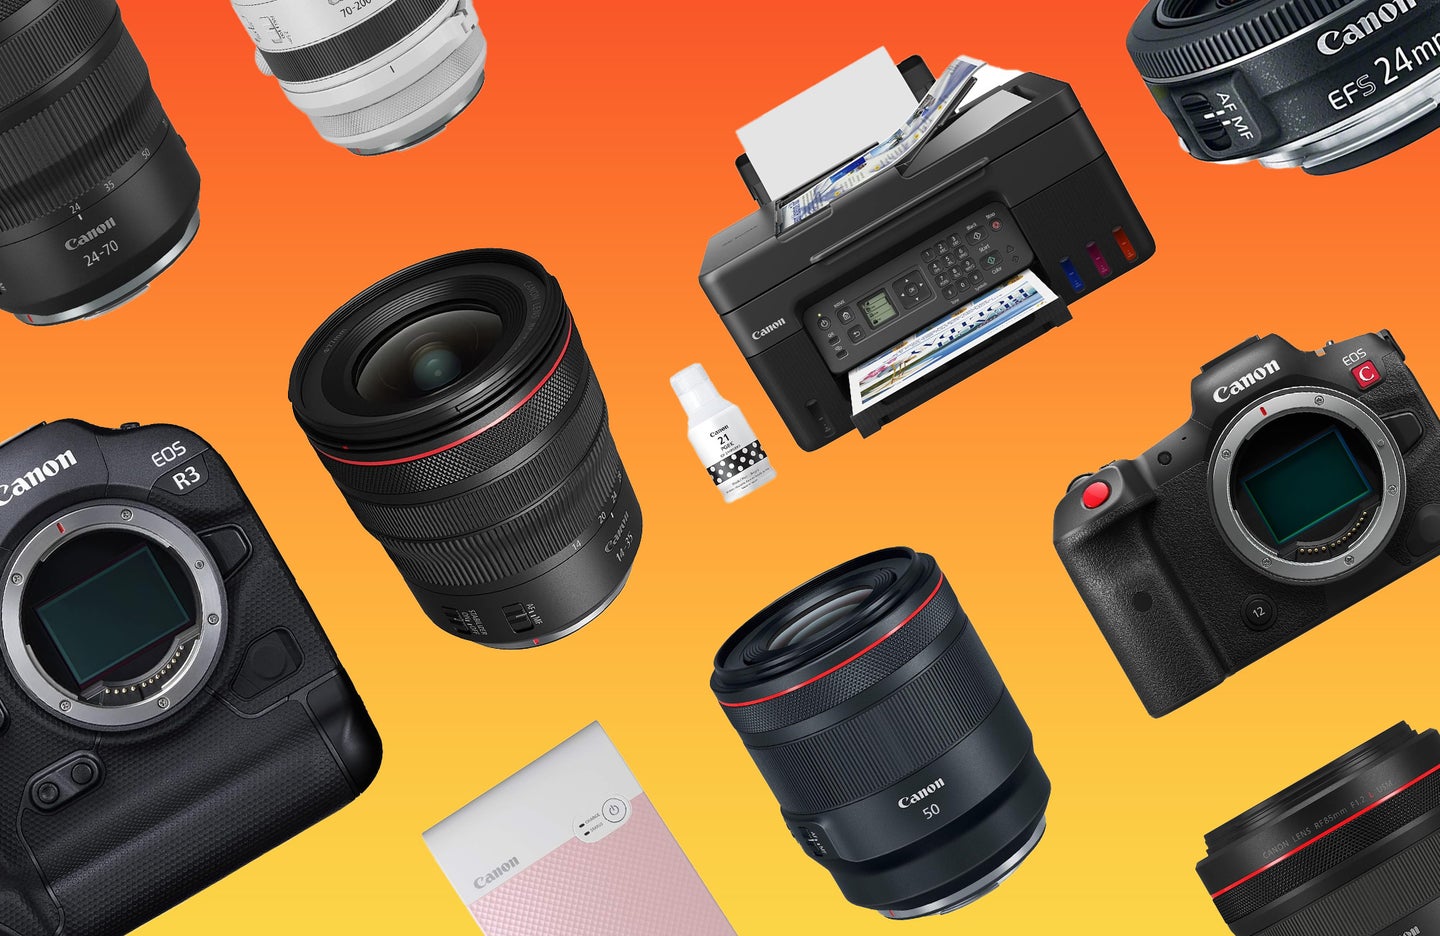 Canon lenses, cameras, and printers against a background fading from orange to red.